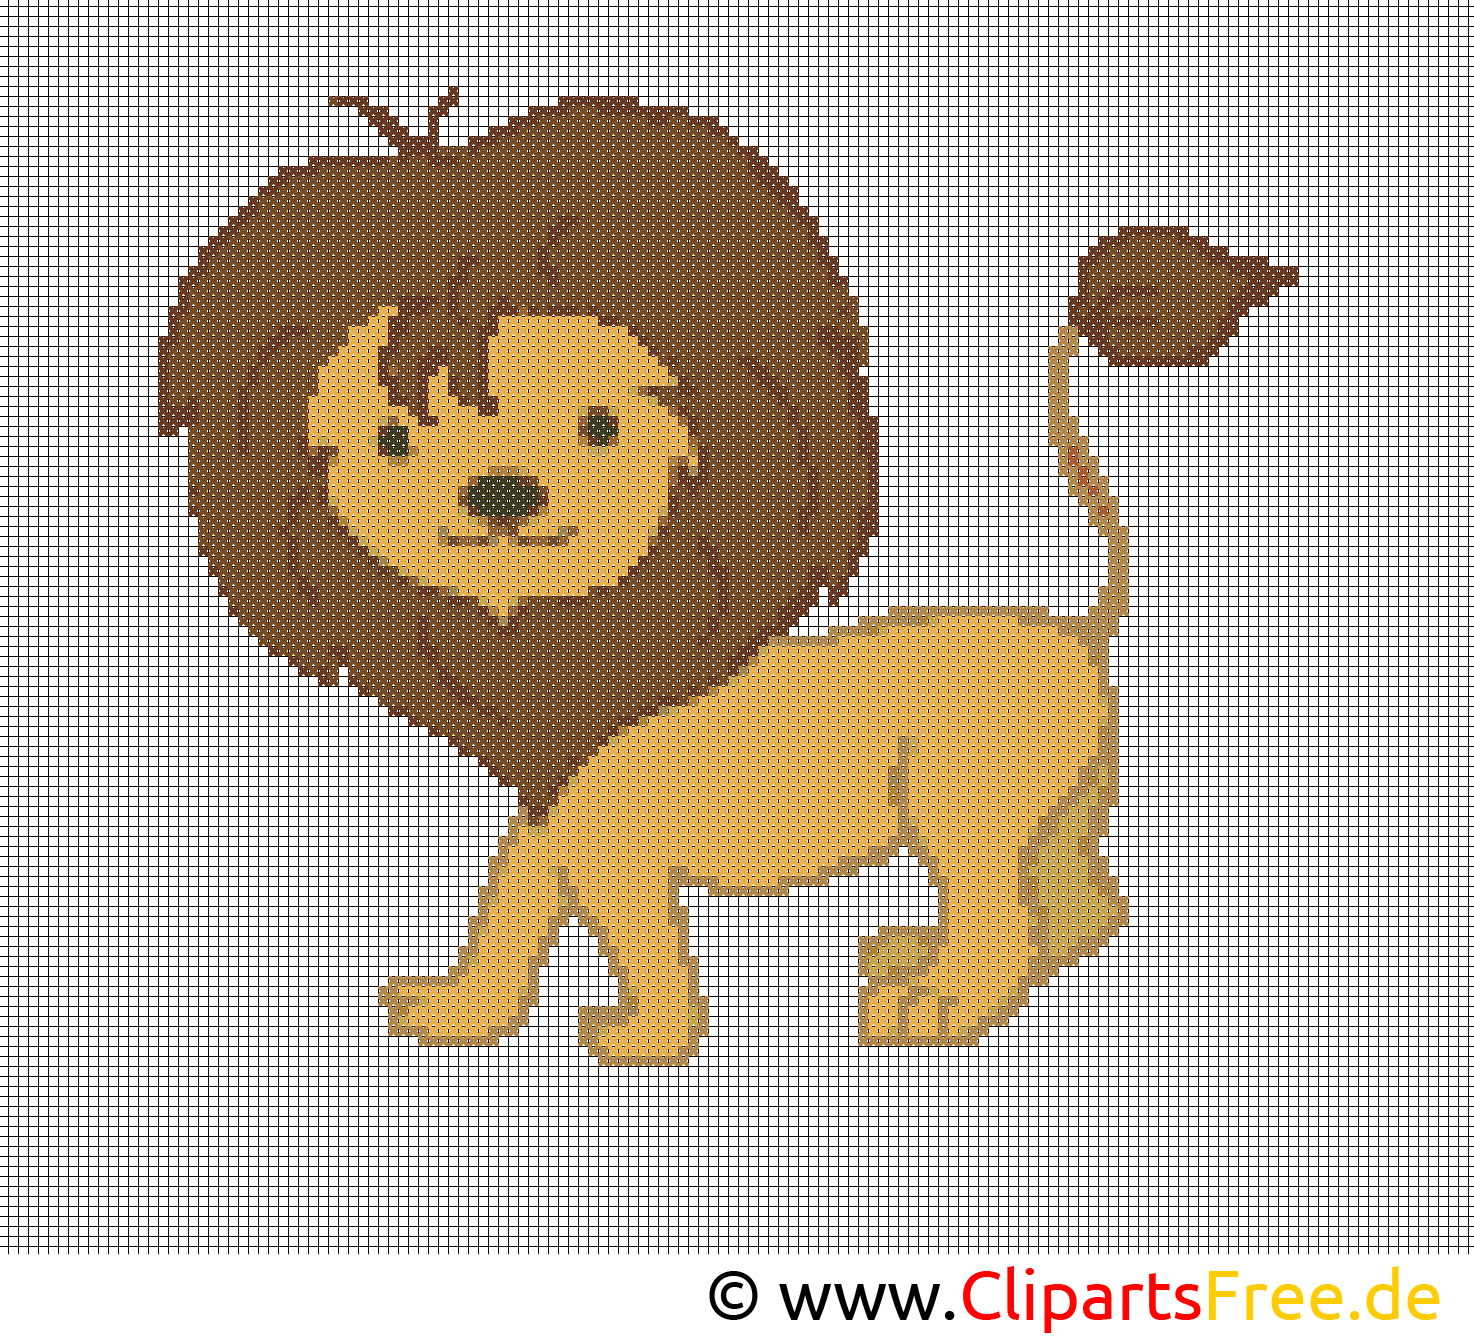 Lion image – Broderie images cliparts